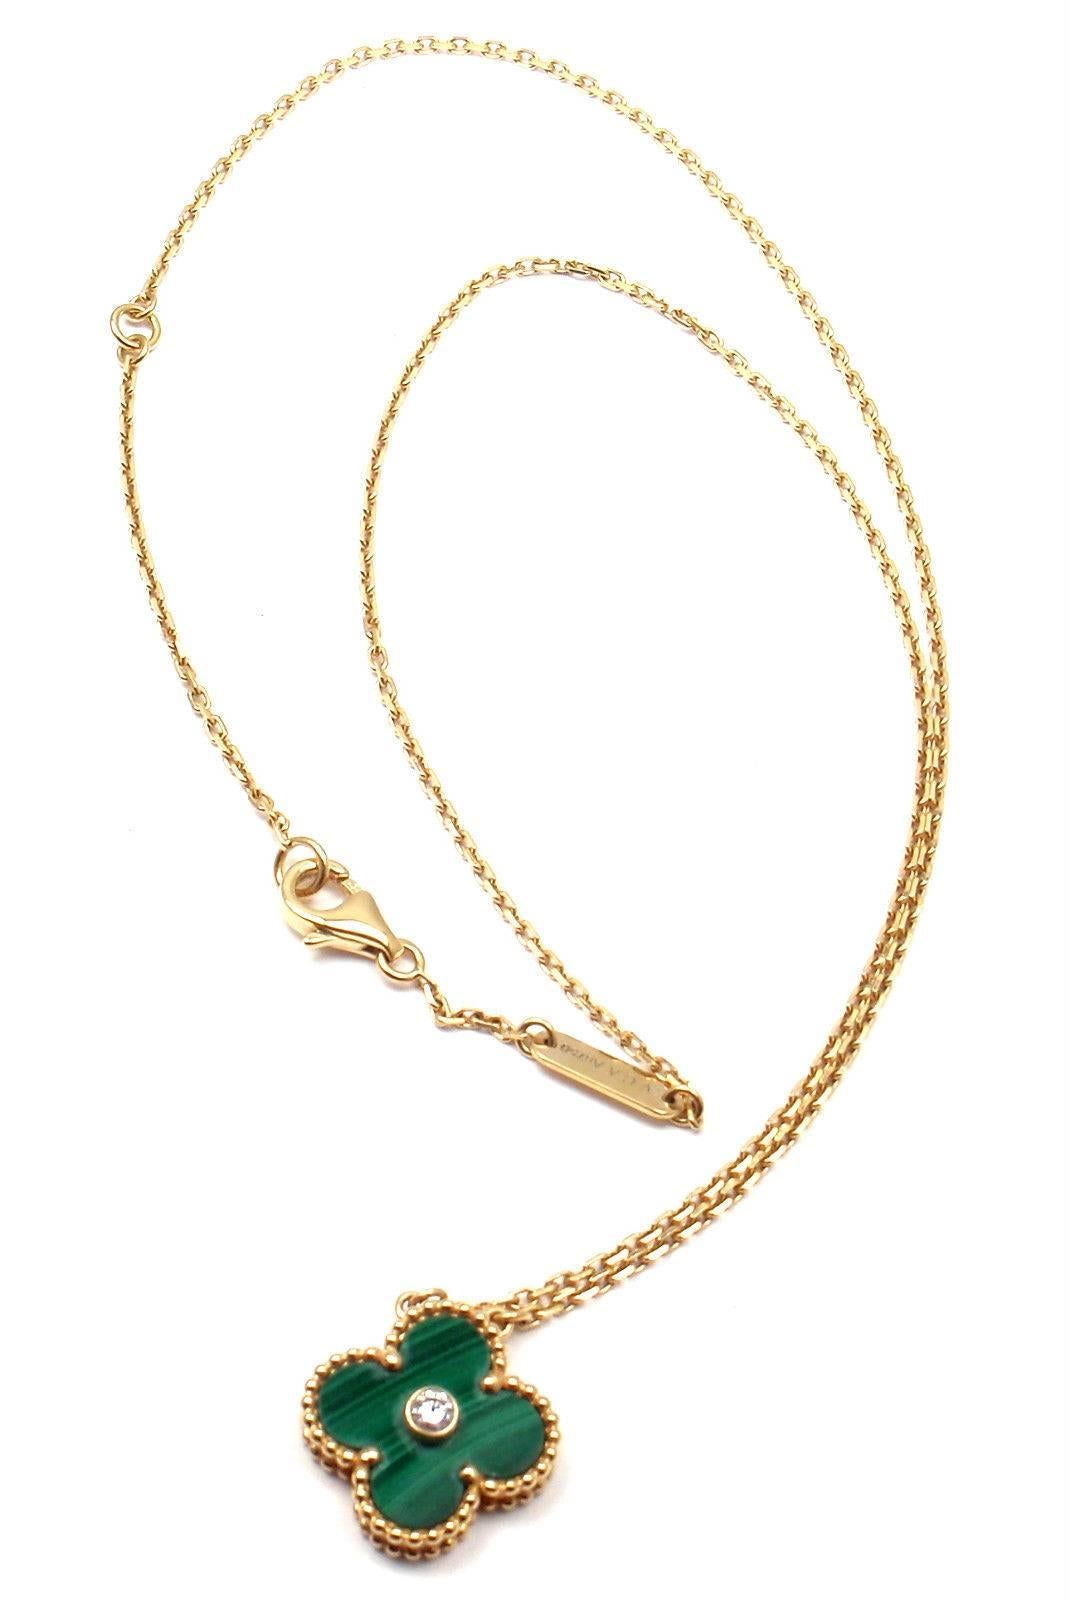 18k Yellow Gold Limited Edition Alhambra Diamond Malachite Necklace
With 1 alhambra shape malachite and a round brilliant cut diamond VVS1 clarity, D color total weight approx. .05ct
This necklace was created in limited by Van Cleef & Arpels to